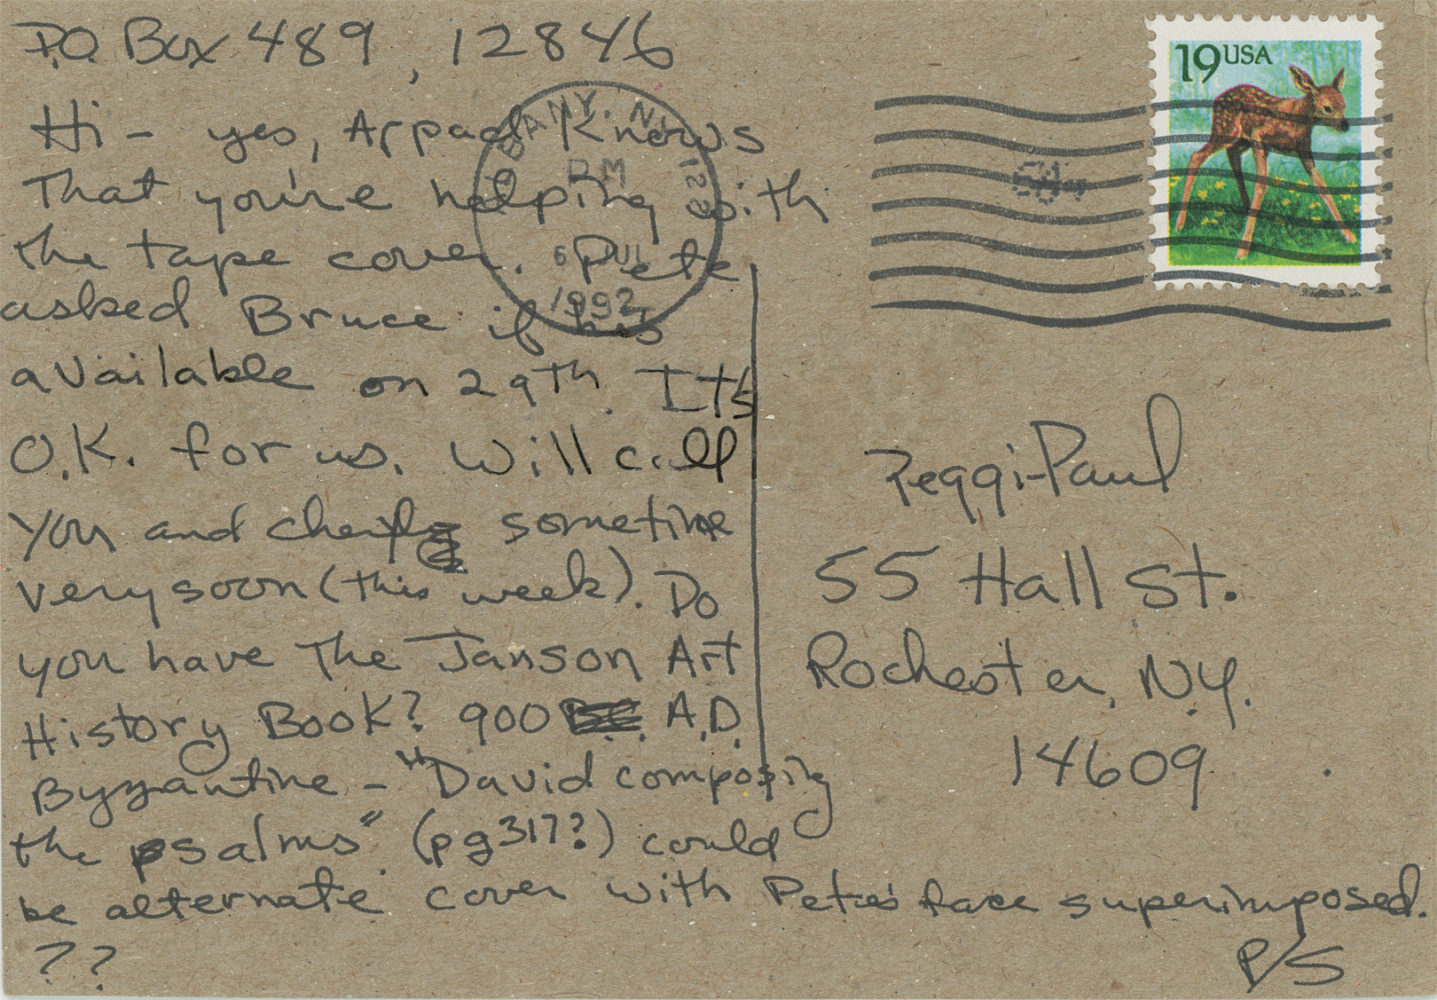 Postcard from Pete and Shelley